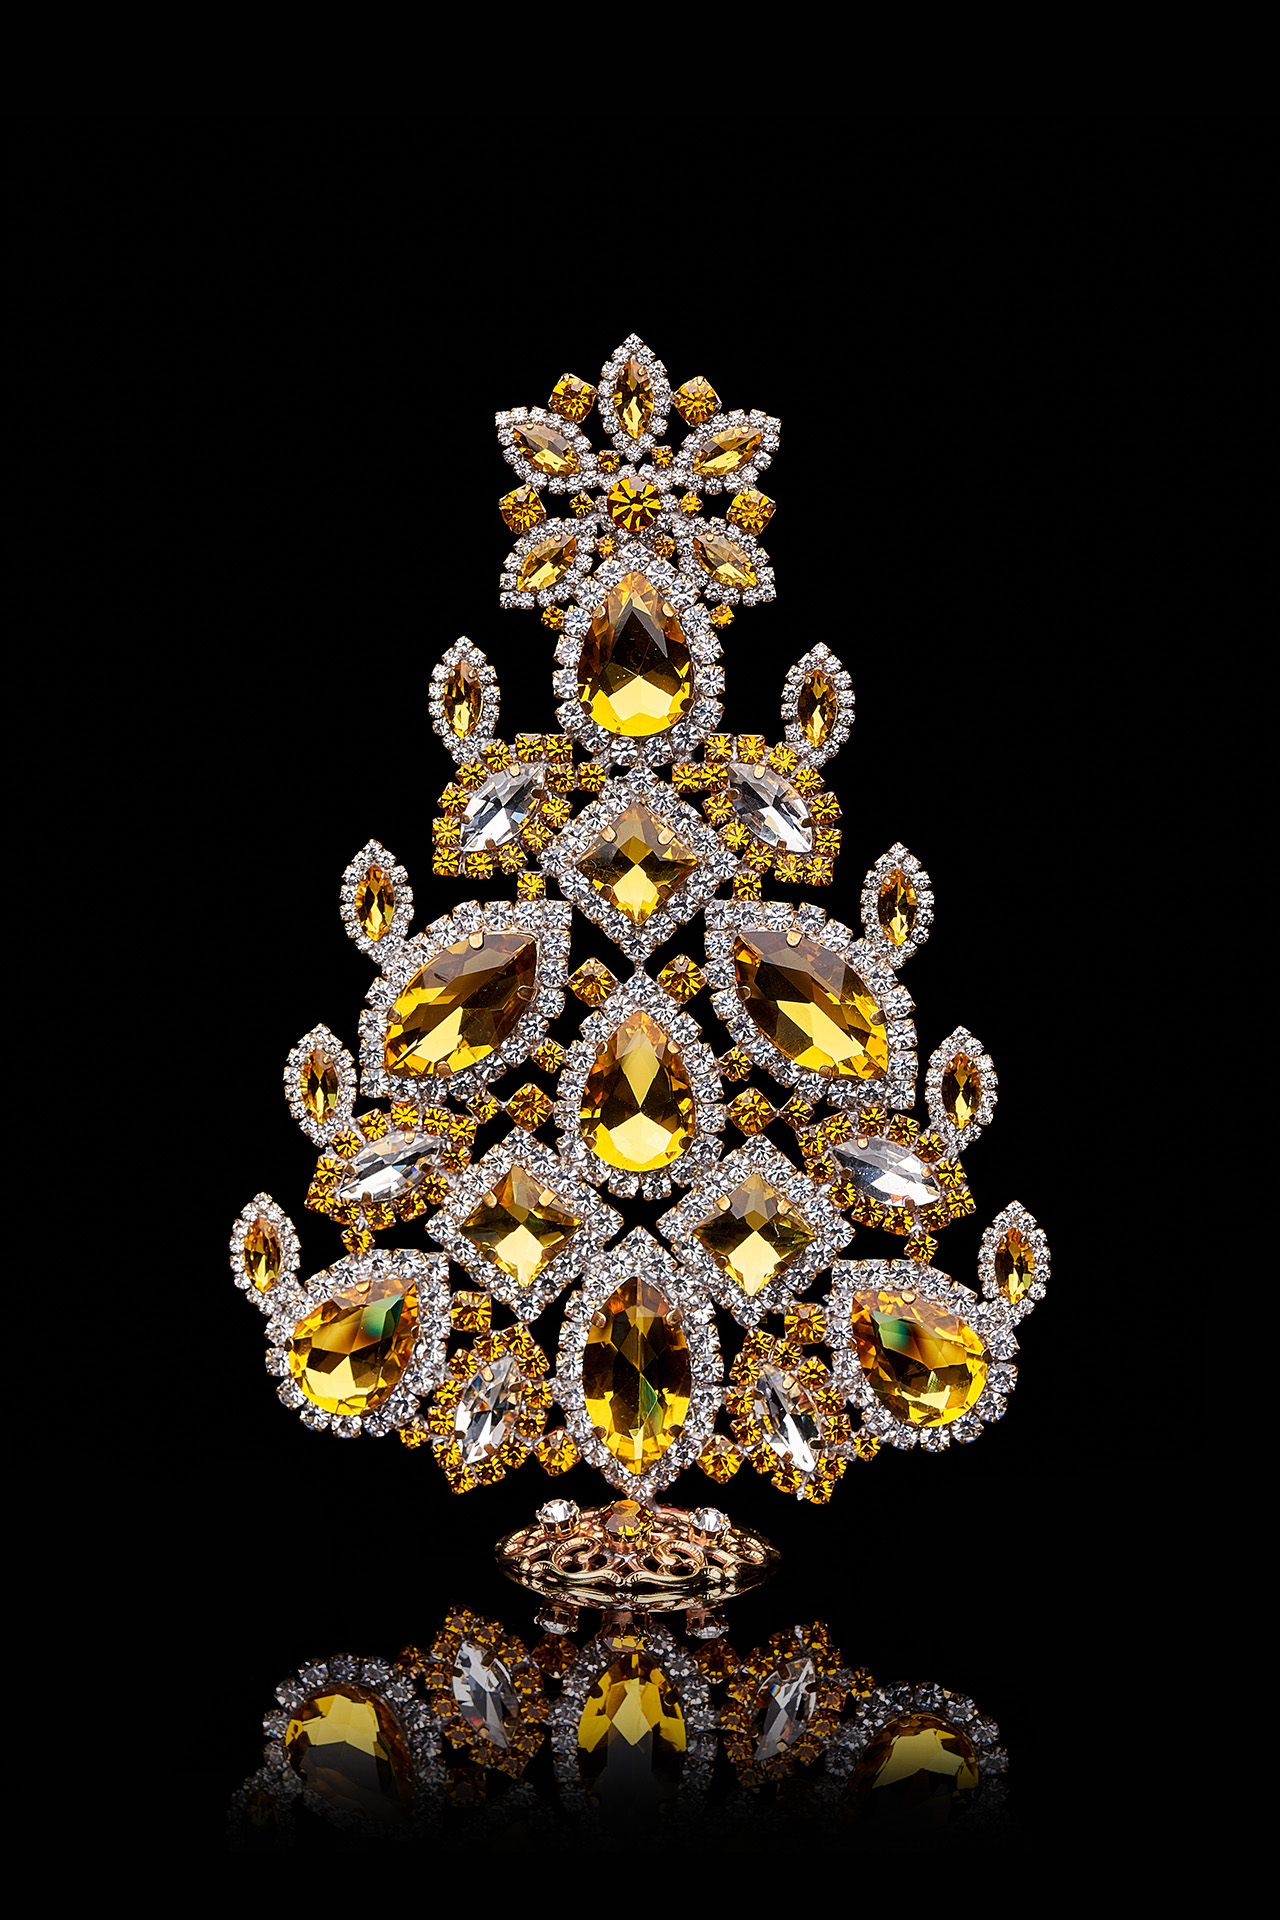 Vintage Christmas tree handcrafted with yellow rhinestones